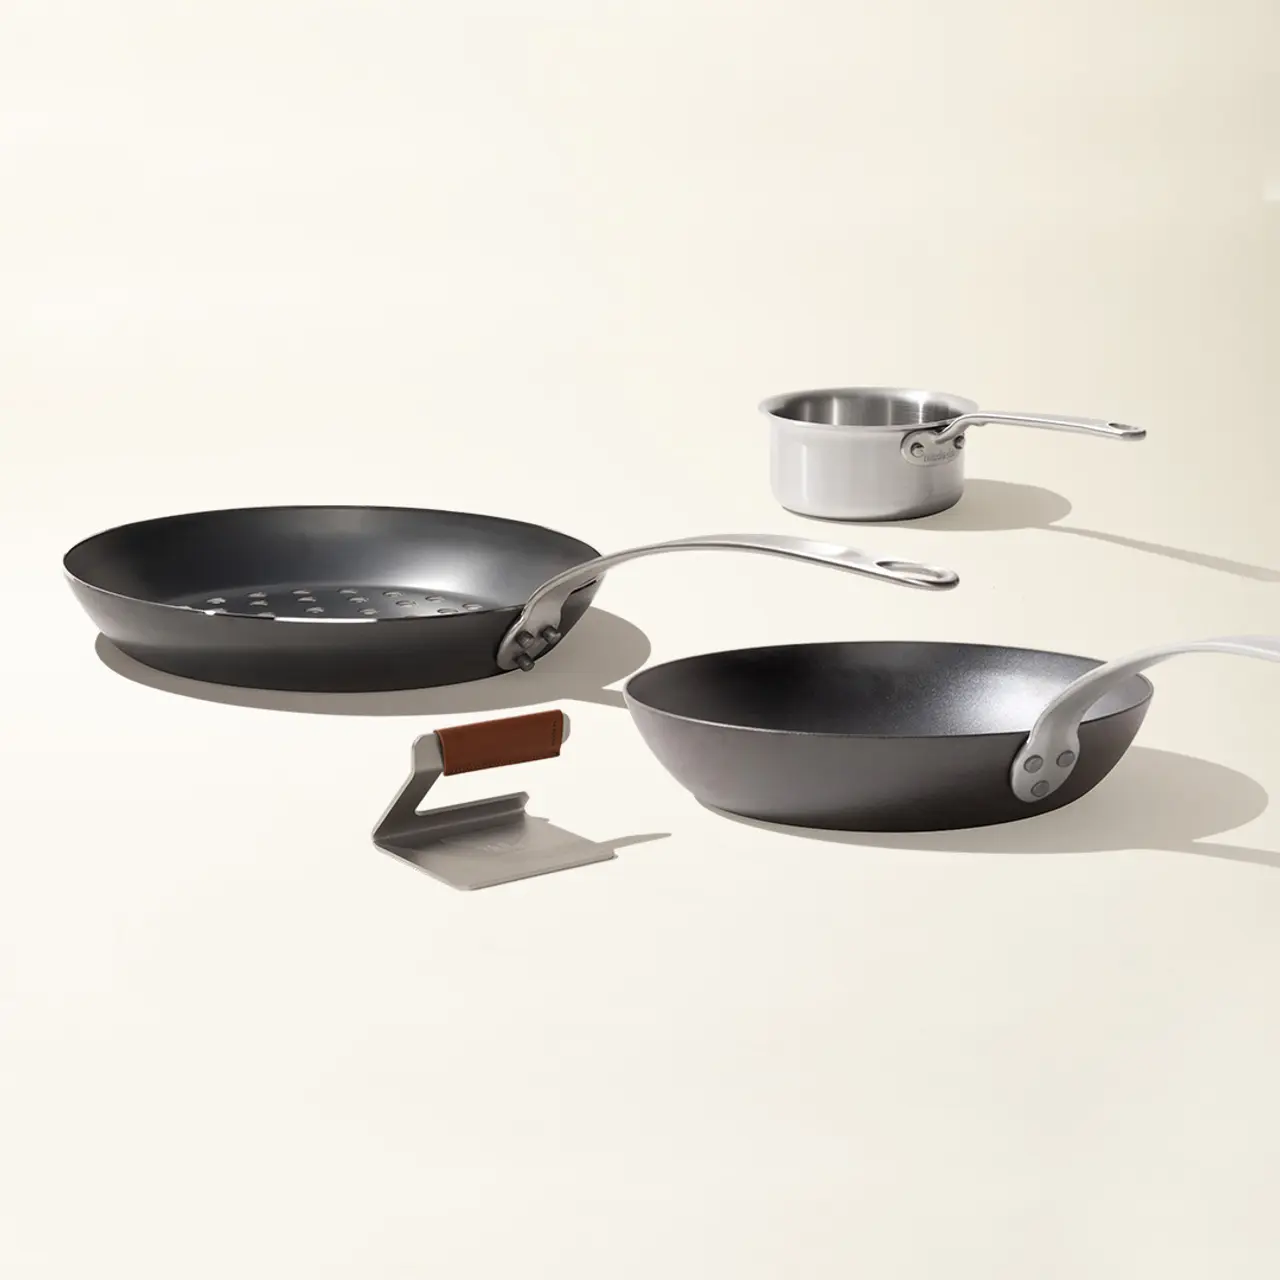 Three different-sized frying pans are arranged on a light background, accompanied by a spatula with a brown handle.